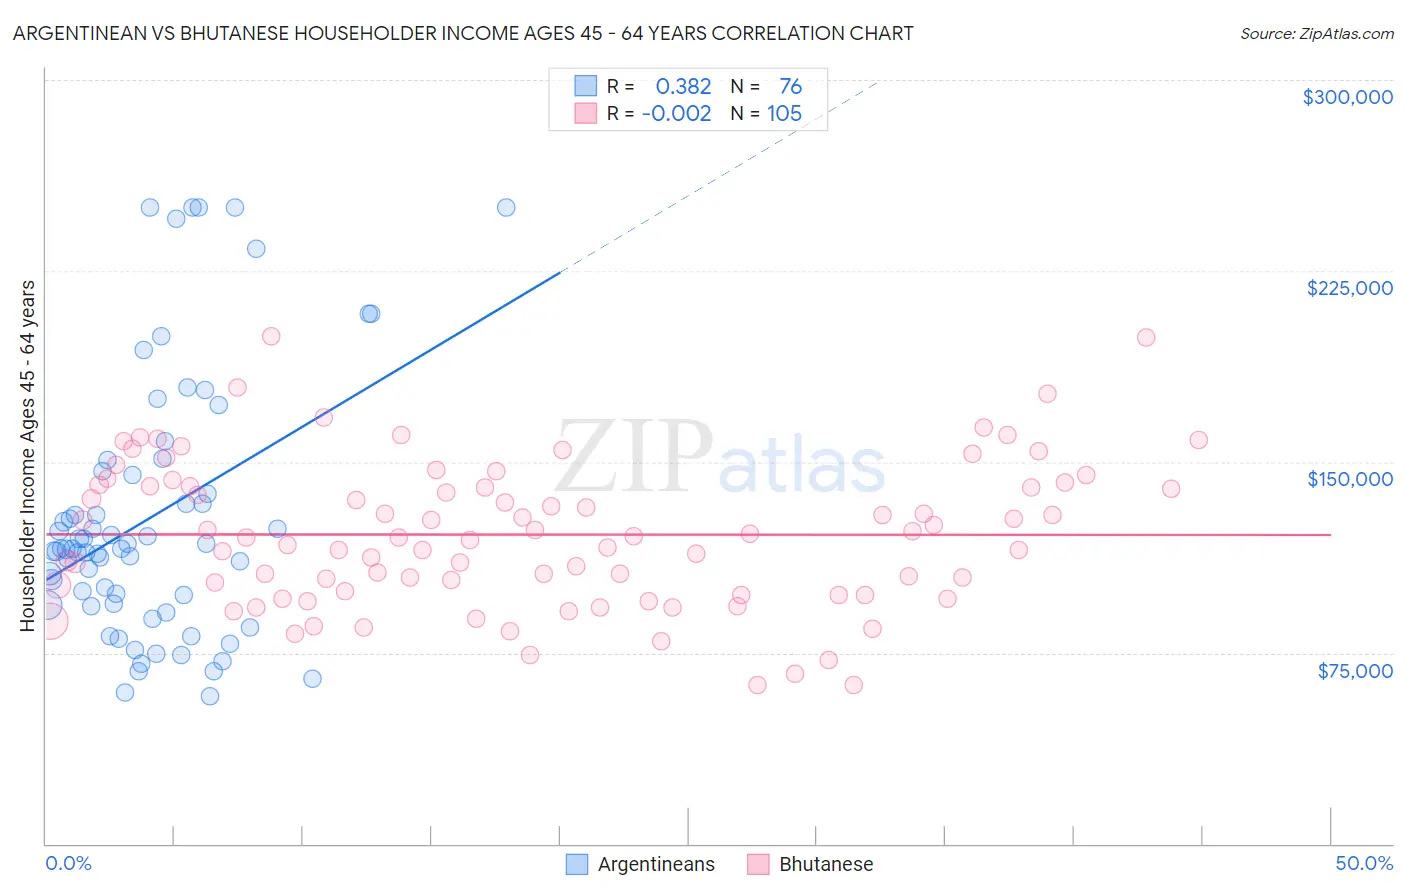 Argentinean vs Bhutanese Householder Income Ages 45 - 64 years